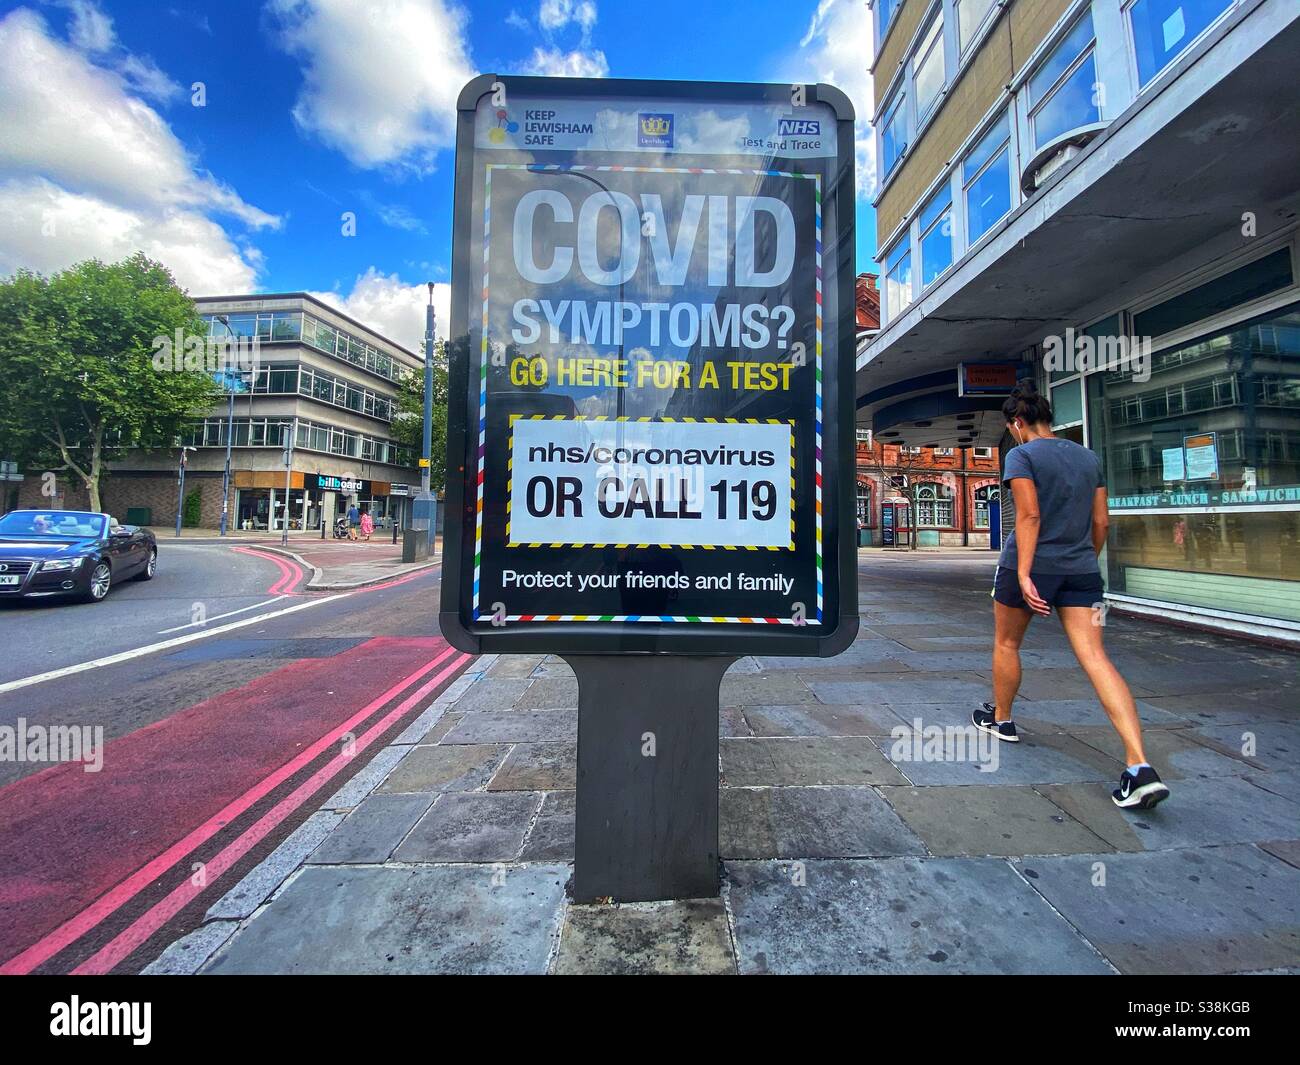 A poster giving more information about getting a COVID-19 test in Lewisham on August 1 in Lewisham London, England Stock Photo